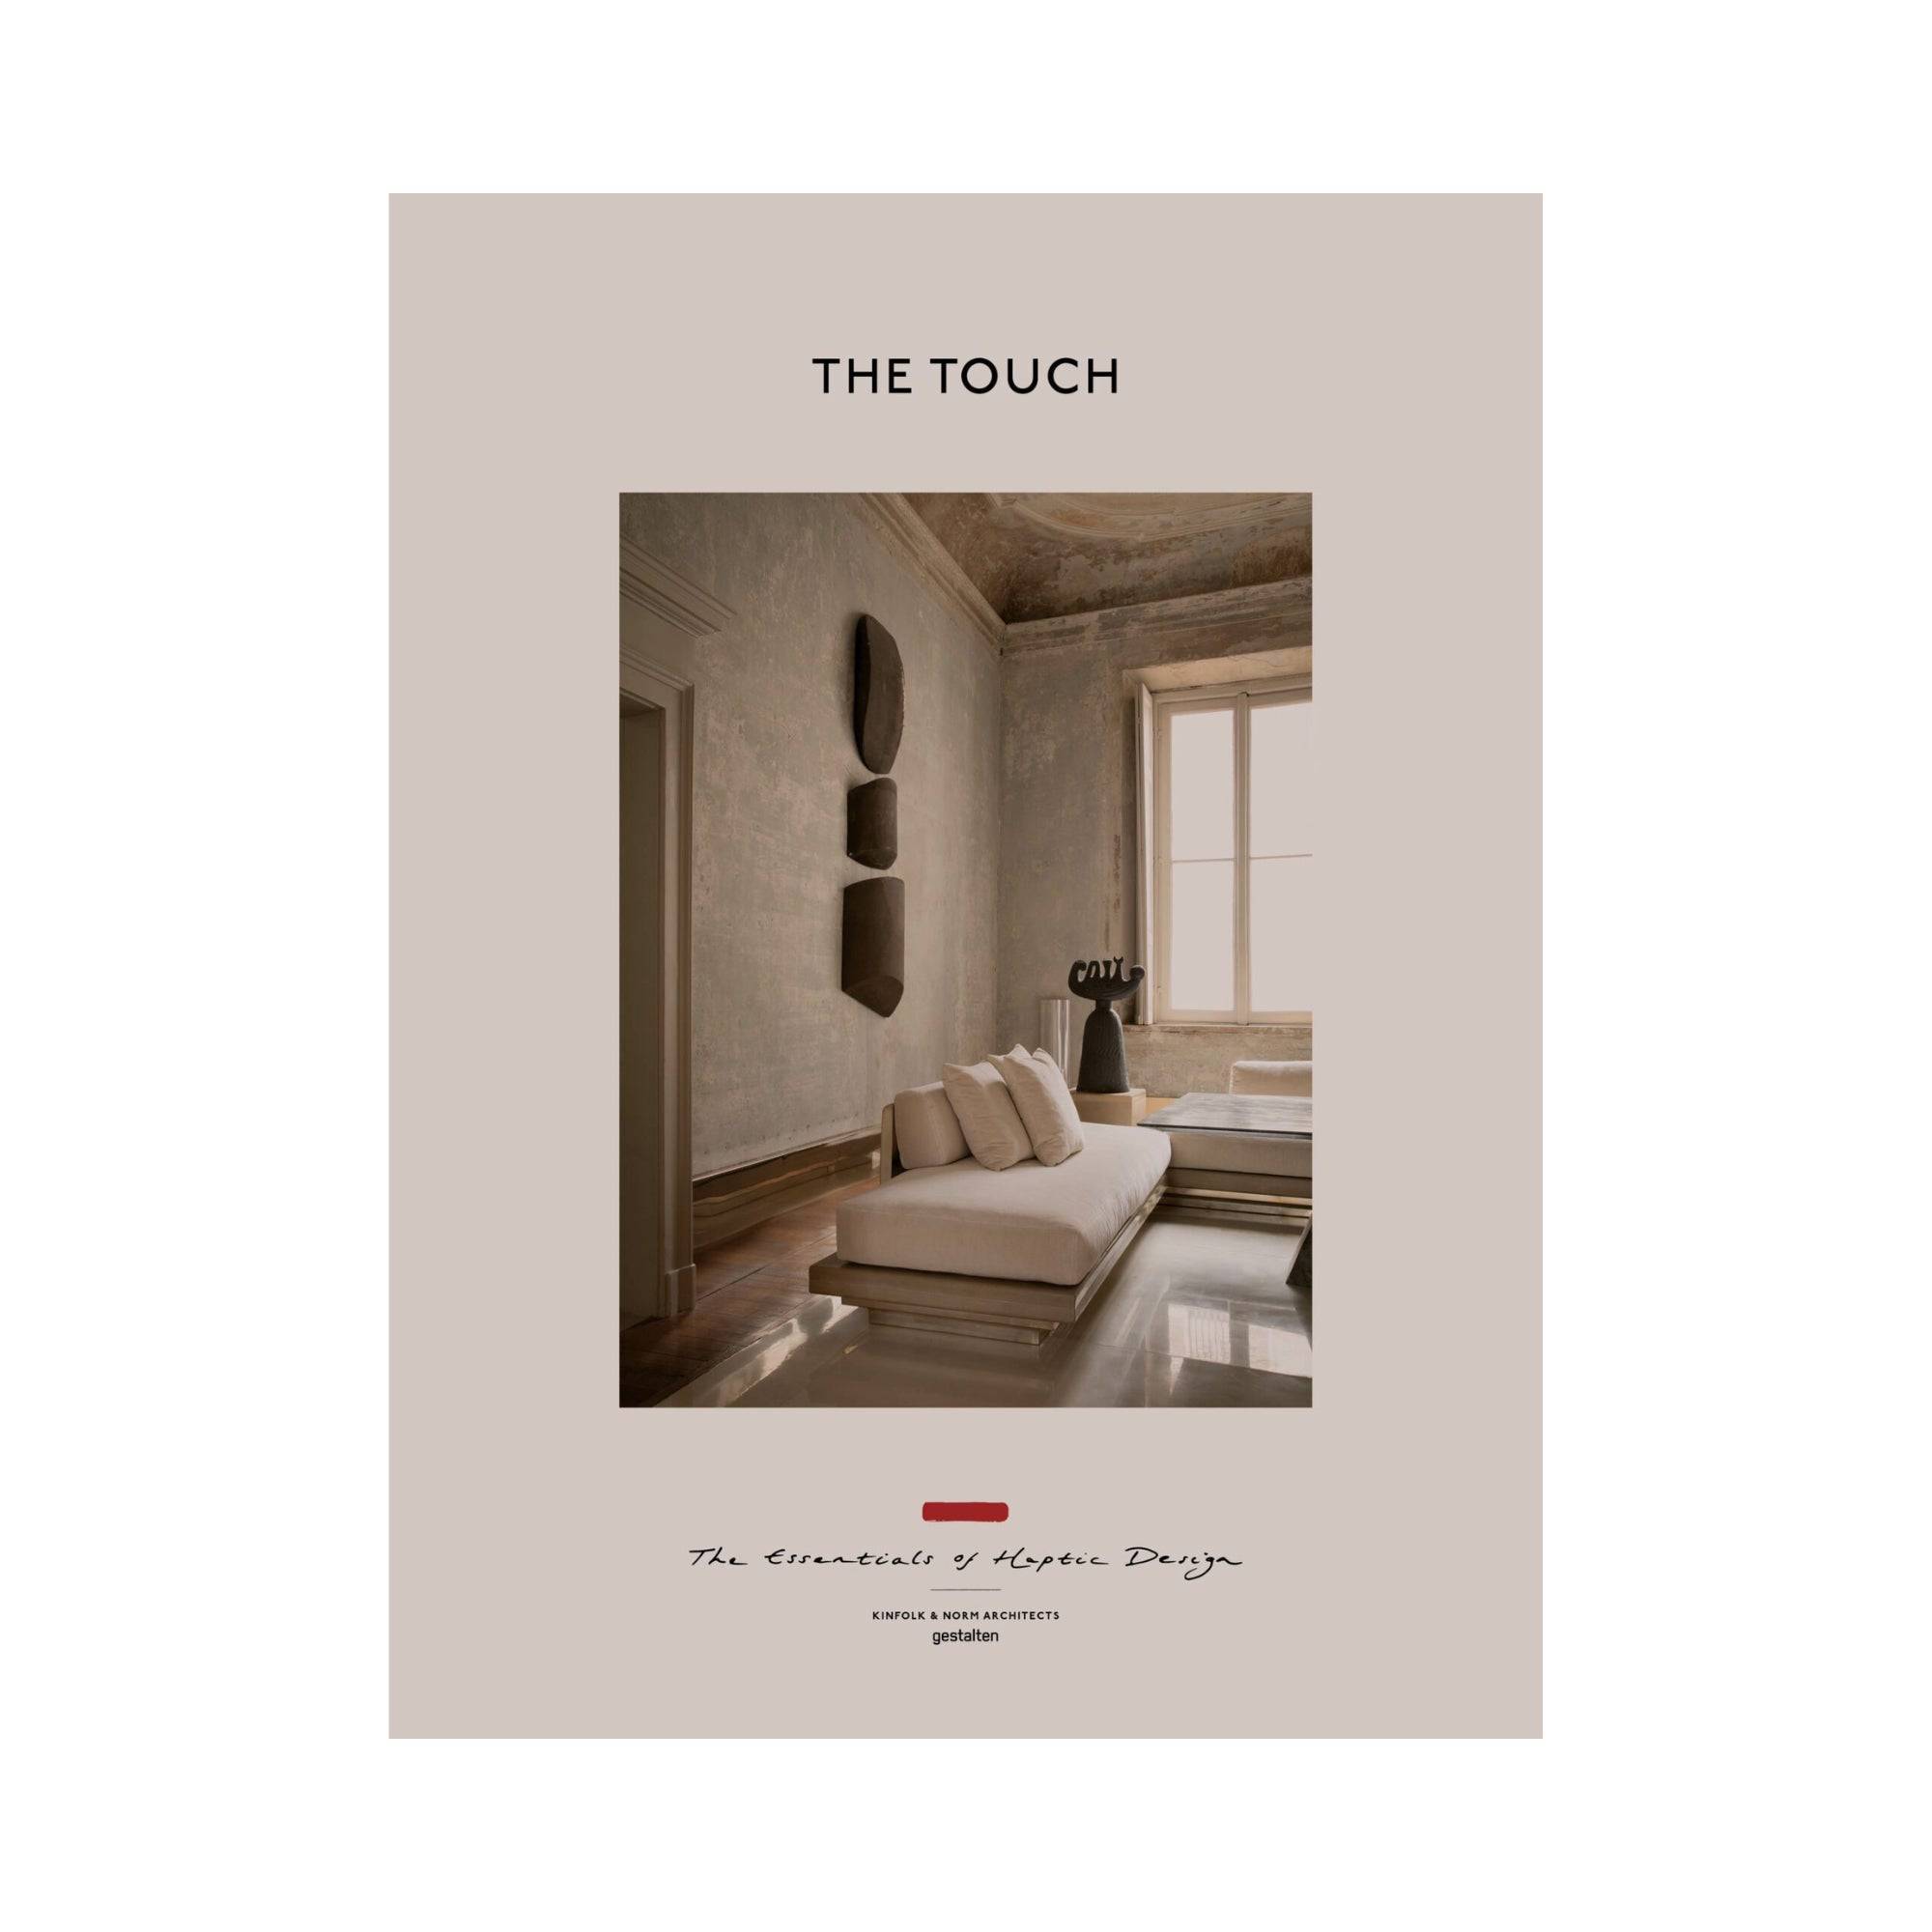 The Touch Limited Edition - THAT COOL LIVING